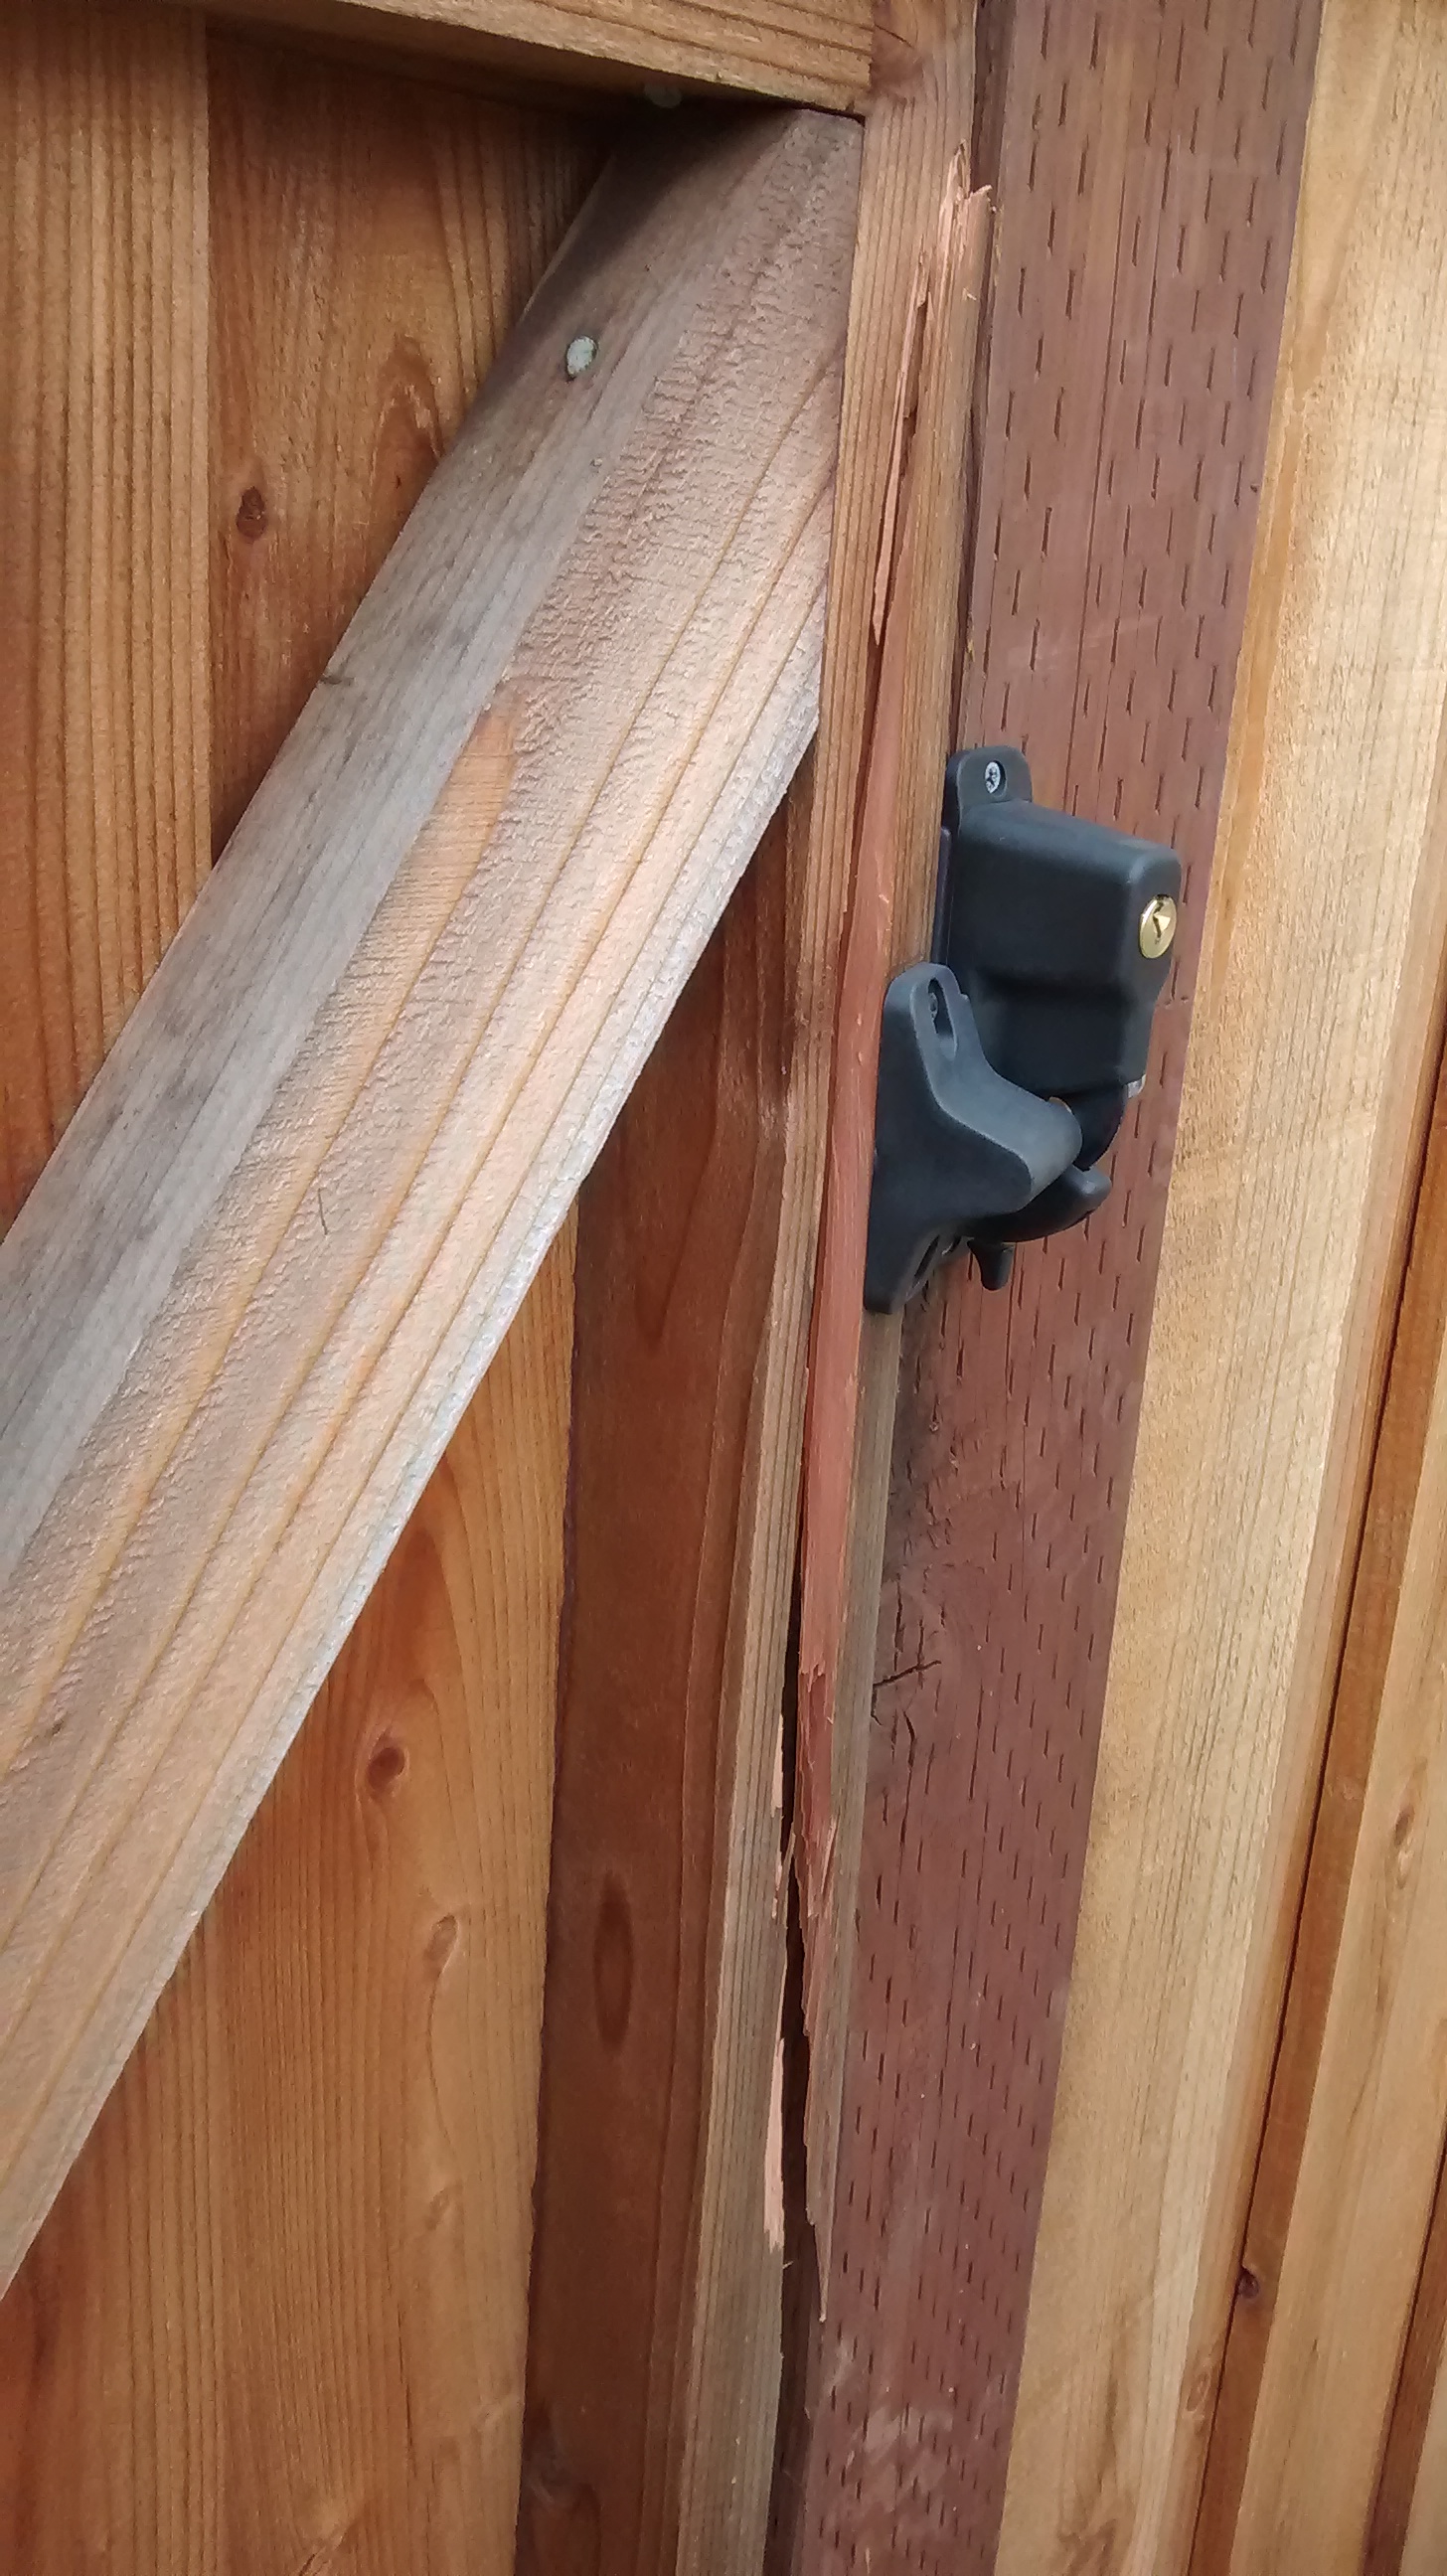 How to fix this broken wood door? (how much, Home Depot, Lowes ...